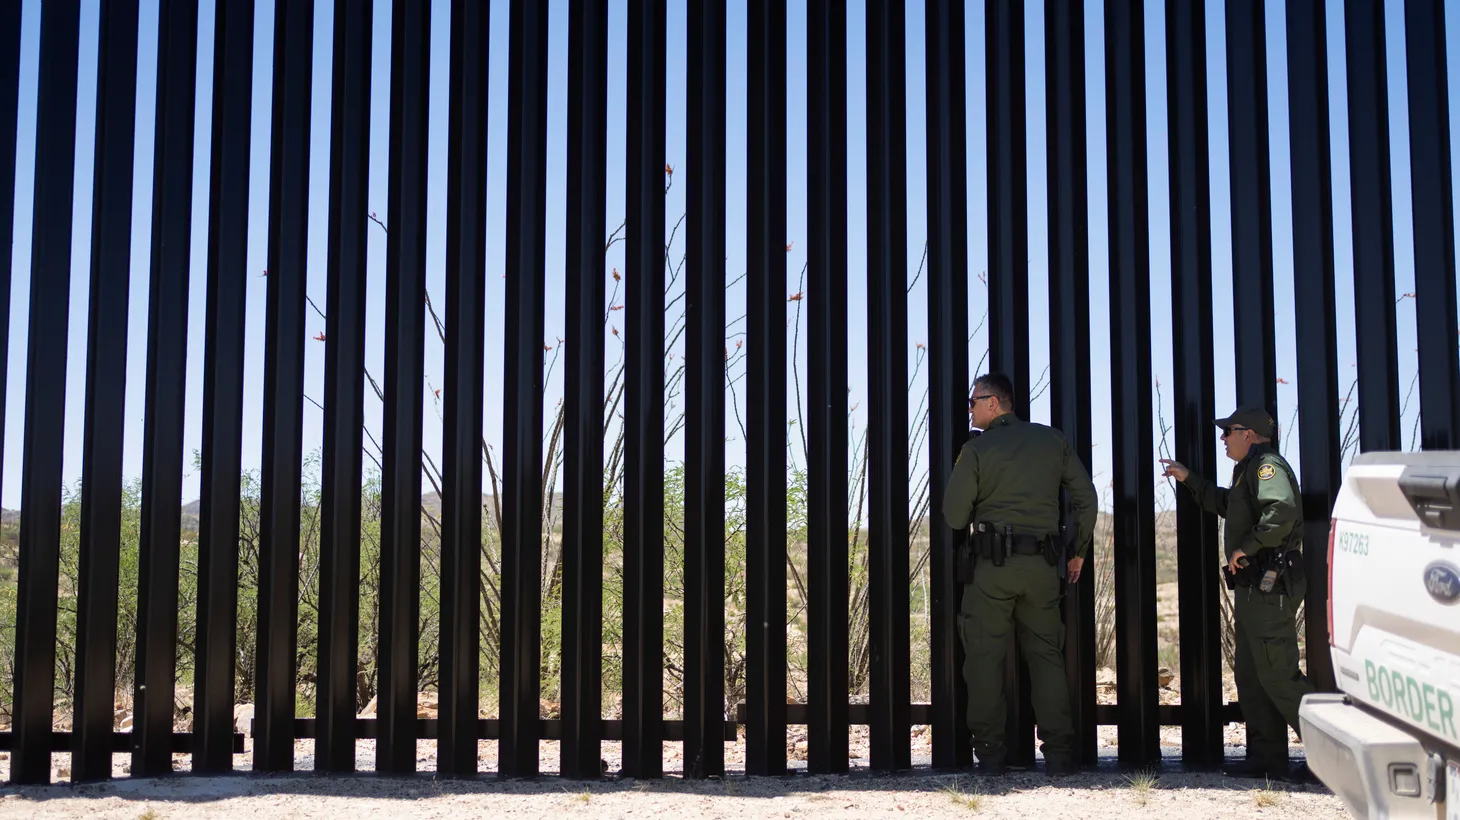 U.S. Customs and Border Protection agent and public information officer Jesus Vasavilbaso, center right, and supervisory agent Carlos Ruiz, right, look for members of the Mexico National Guard Performing a mirror patrol on the other side of the U.S.-Mexico border near Sasabe, Arizona, U.S., May 10, 2022.